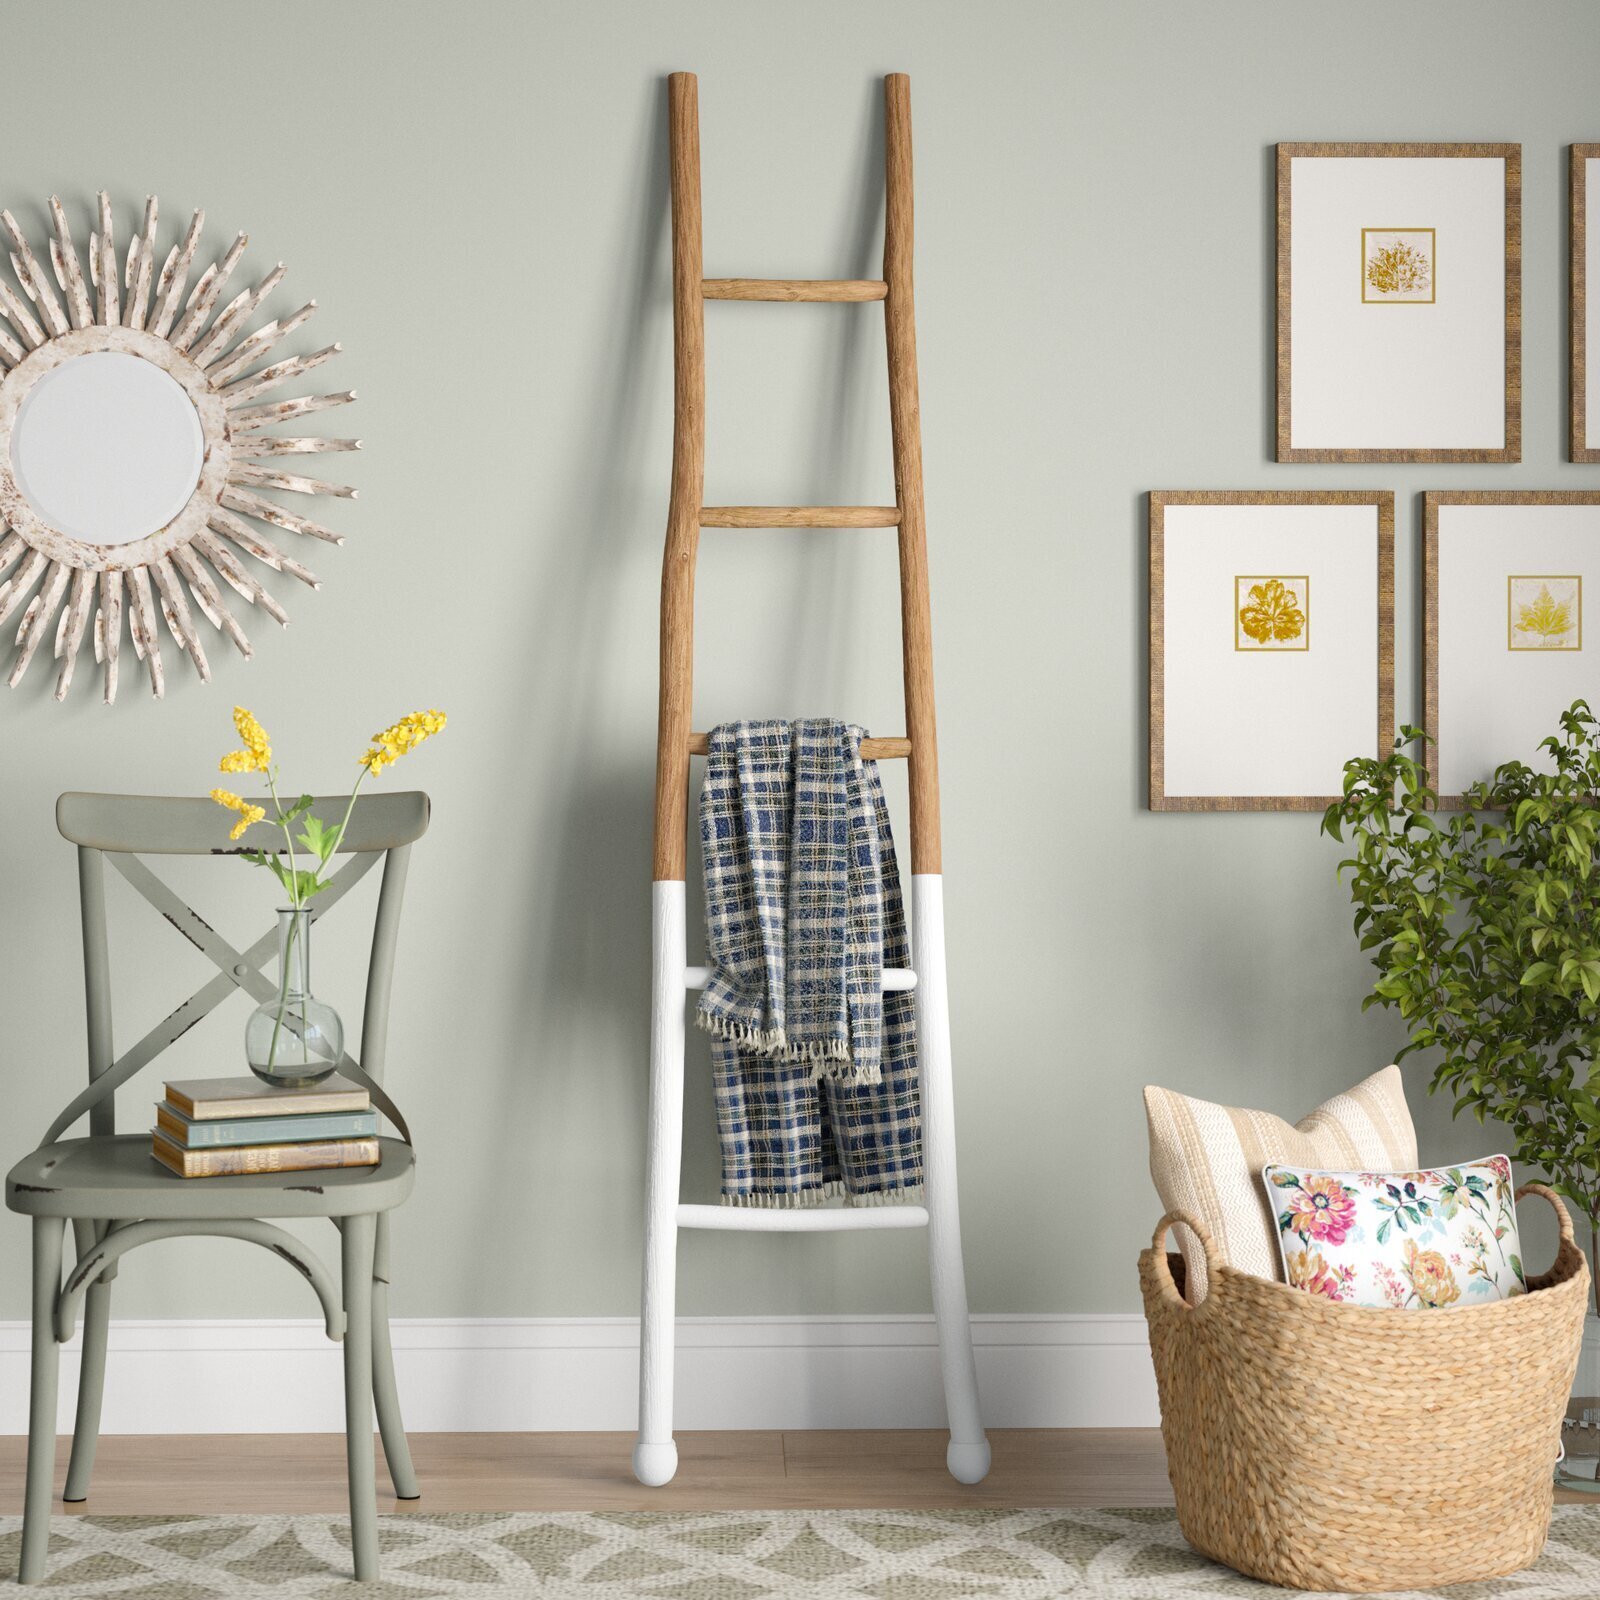 Are Blanket Ladders in Style 2022?